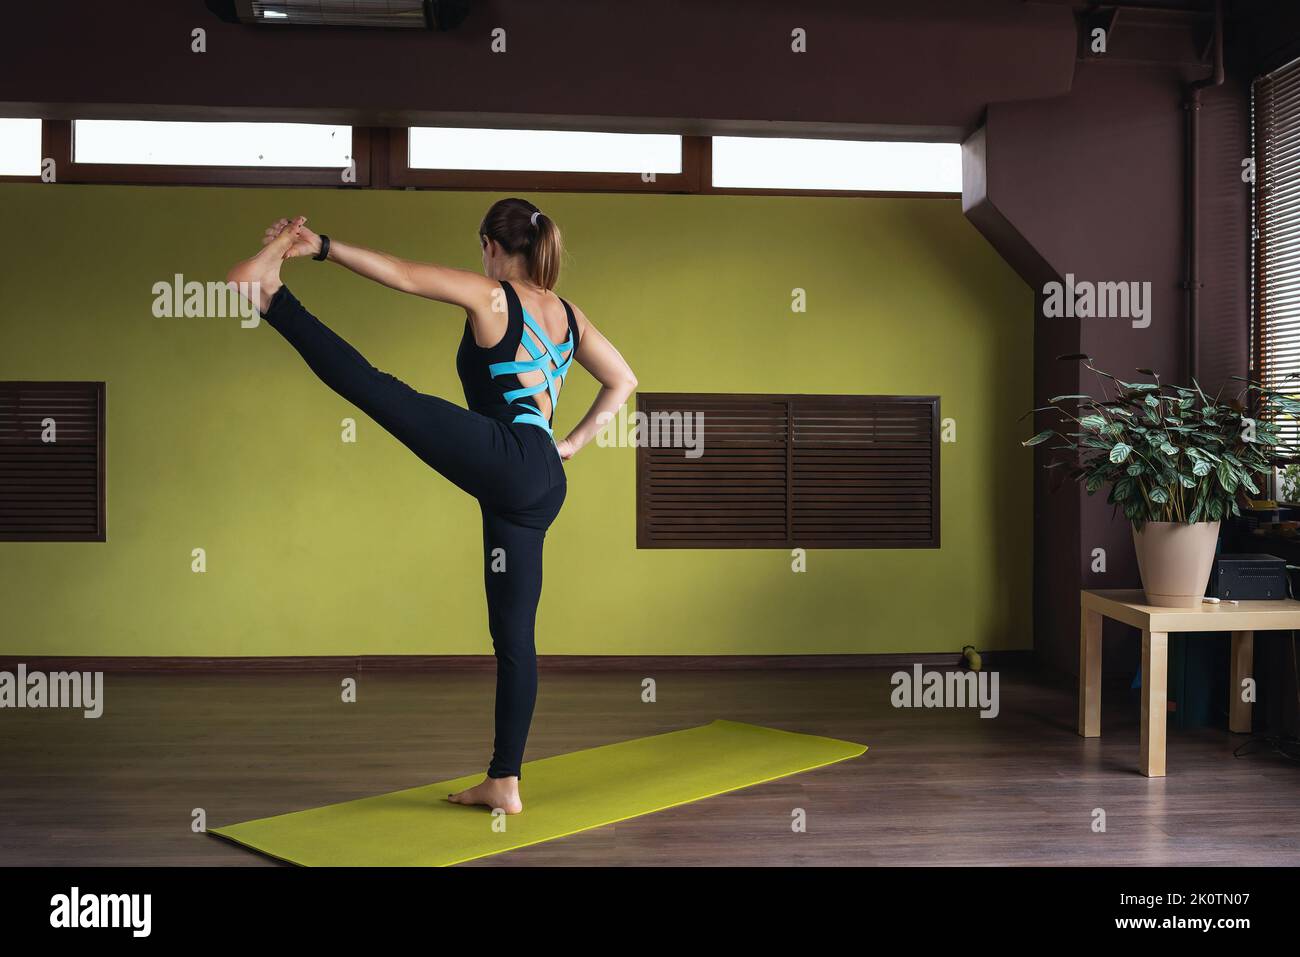 Woman in sports overalls practicing yoga doing Utthita hasta padangushthasana exercise, outstretched leg pose, training while standing on mat in studi Stock Photo